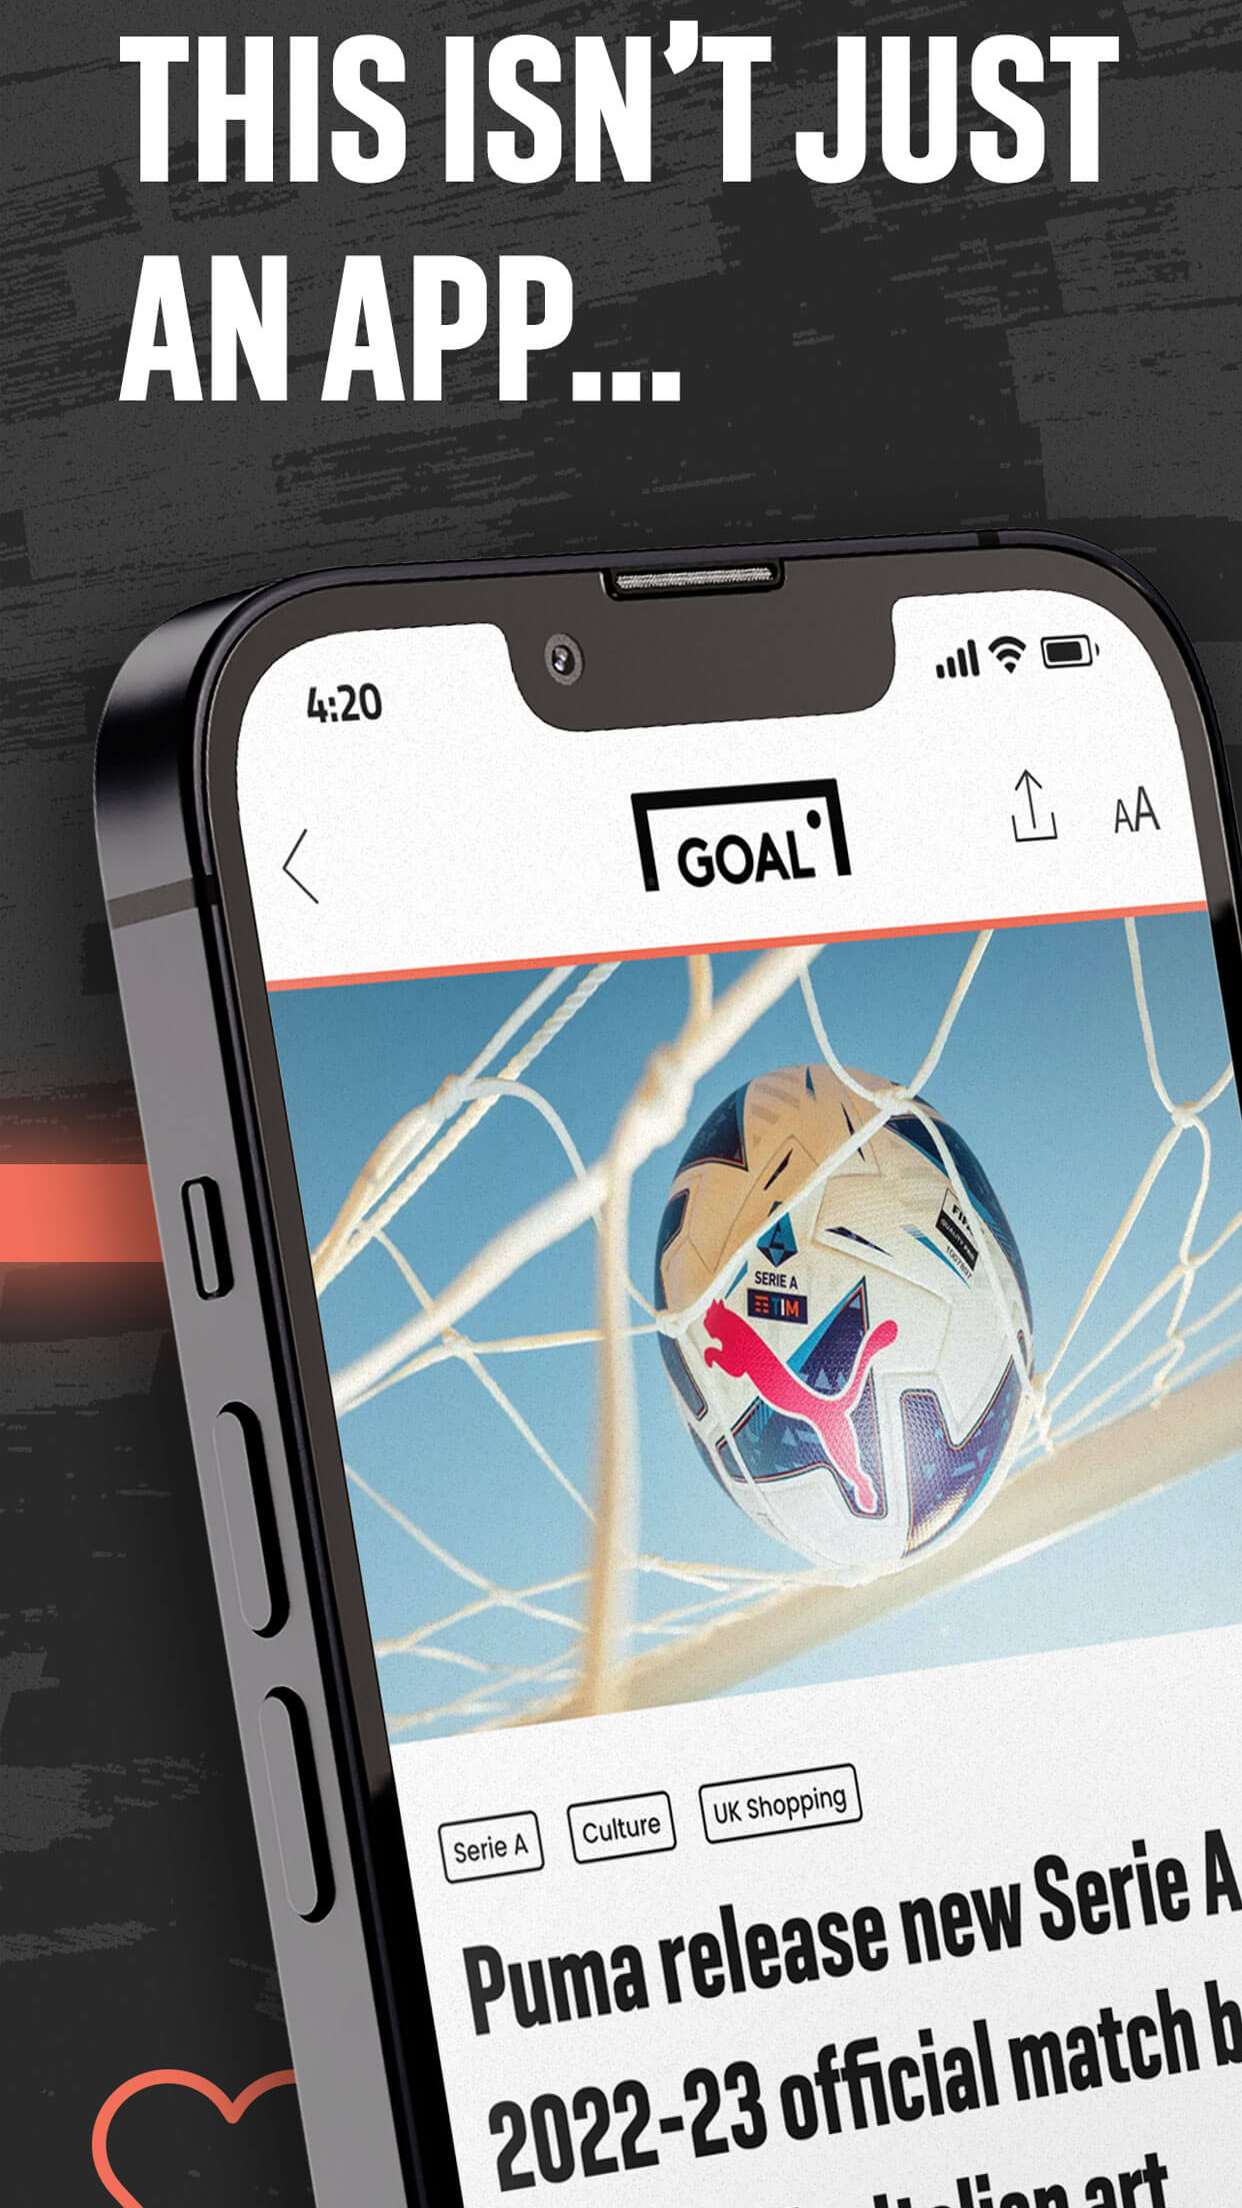 Top Sports Apps for iPhone on the iOS App Store in Cambodia · Appfigures